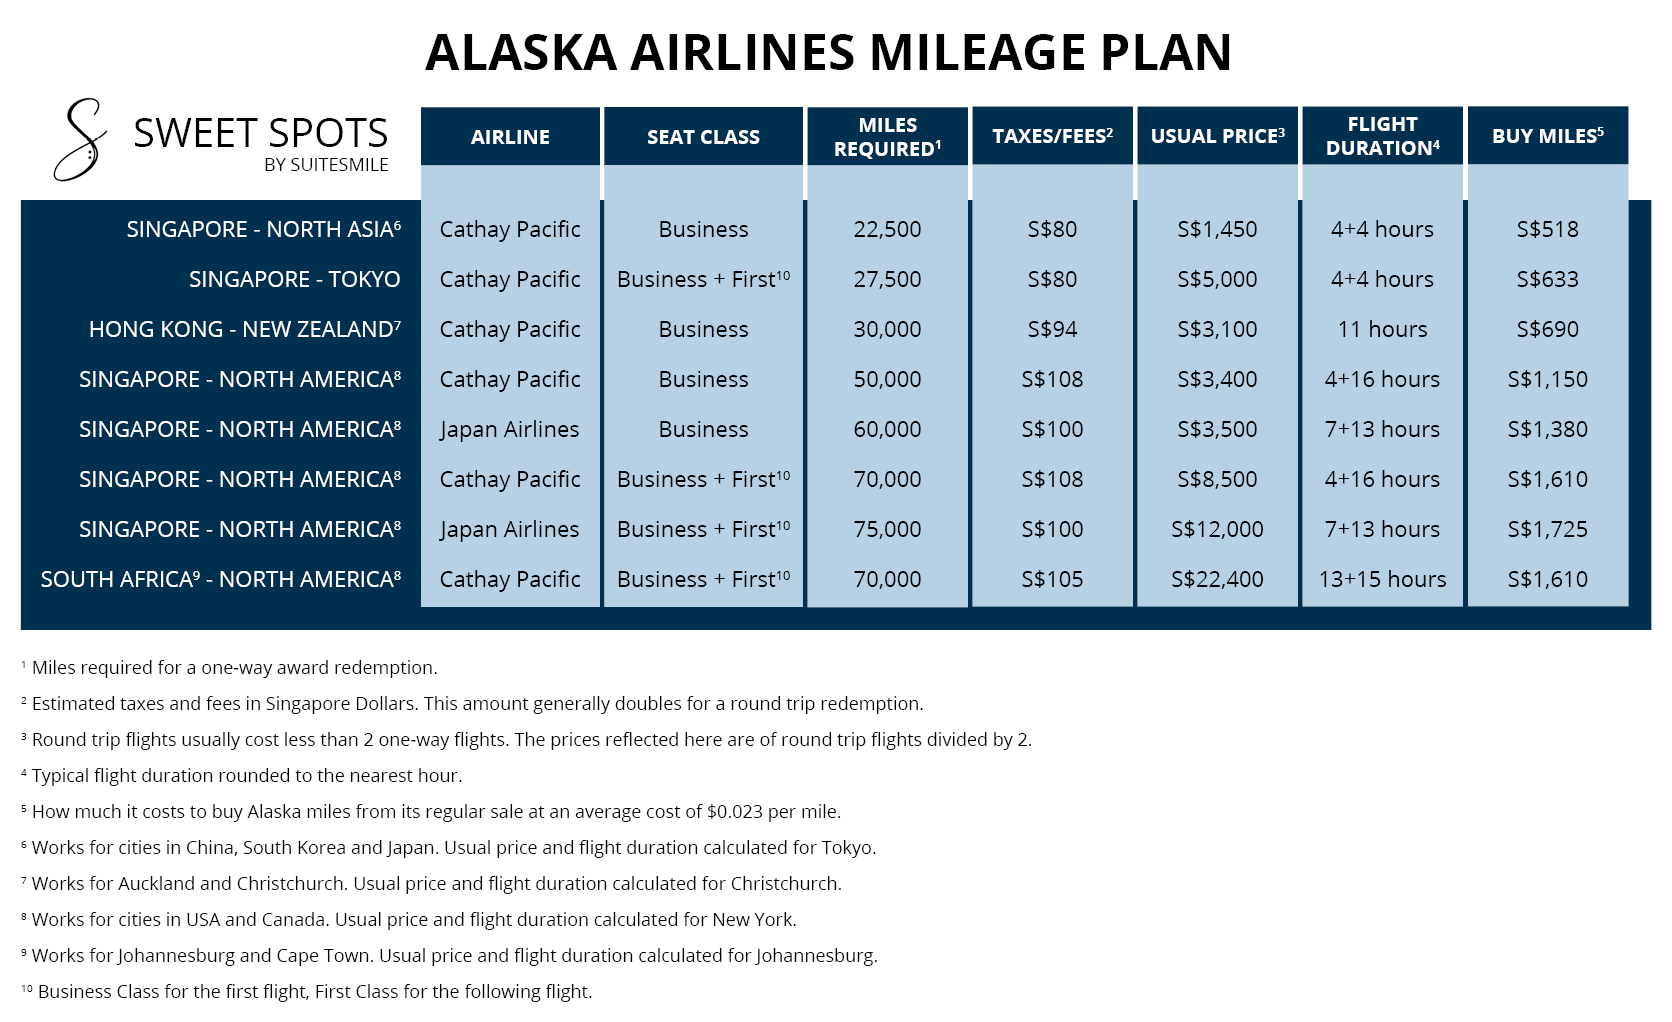 Alaska Airlines sweet spots at $0.023 a mile